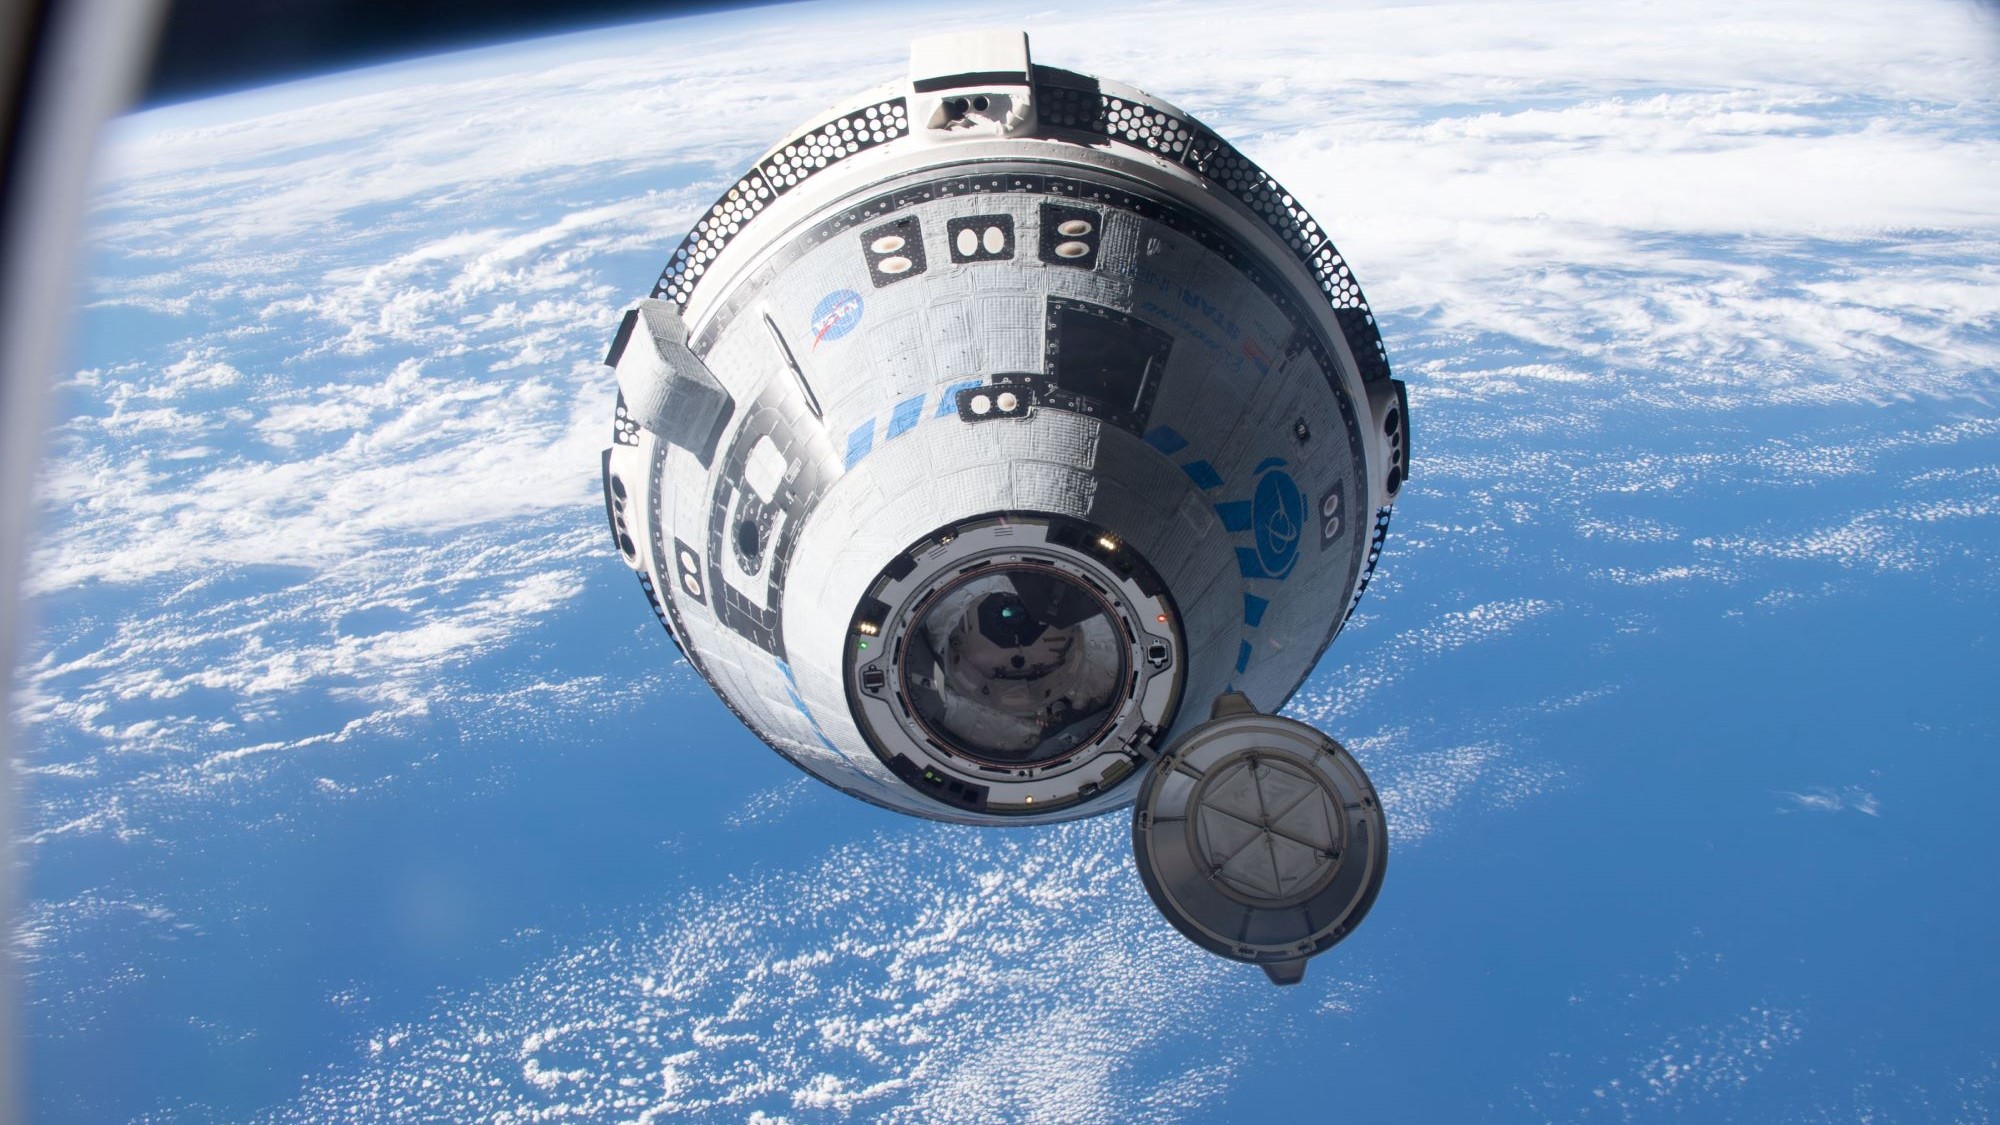 The white Boeing Starliner capsule above a blue Earth.